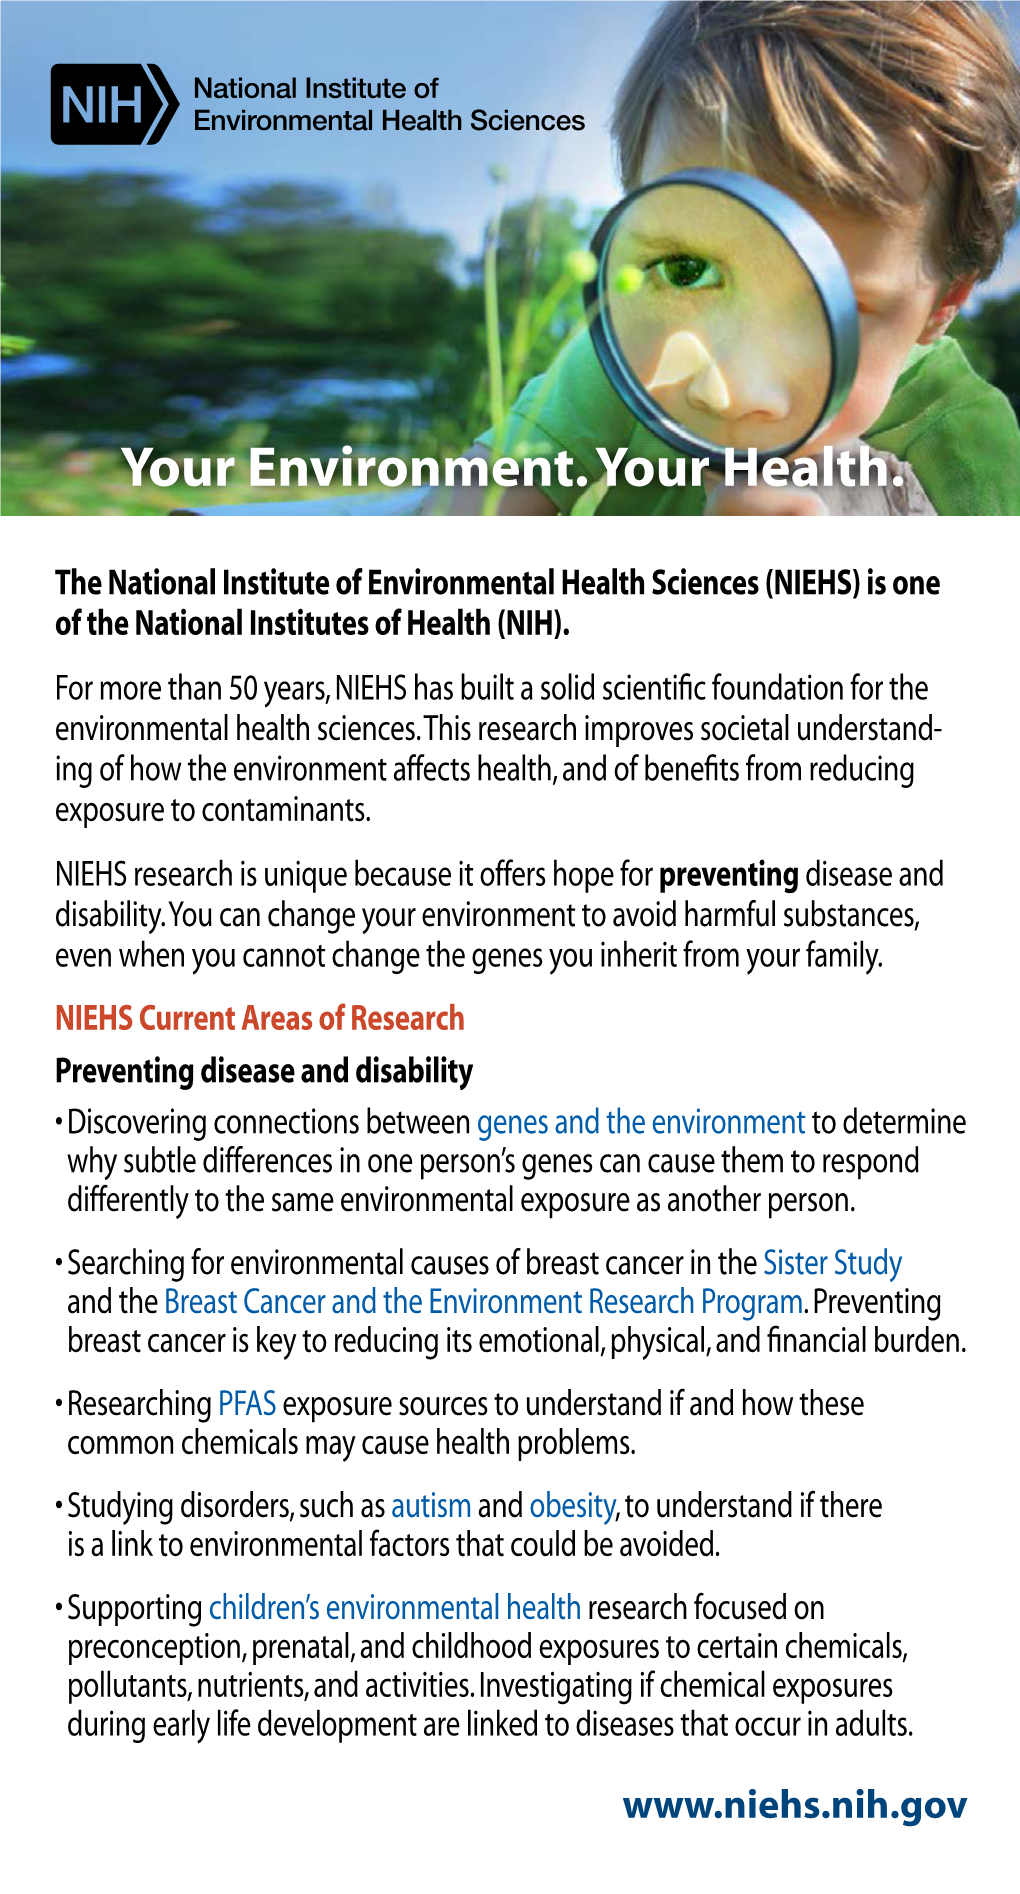 Your Environment. Your Health. (NIEHS Pocket Card)